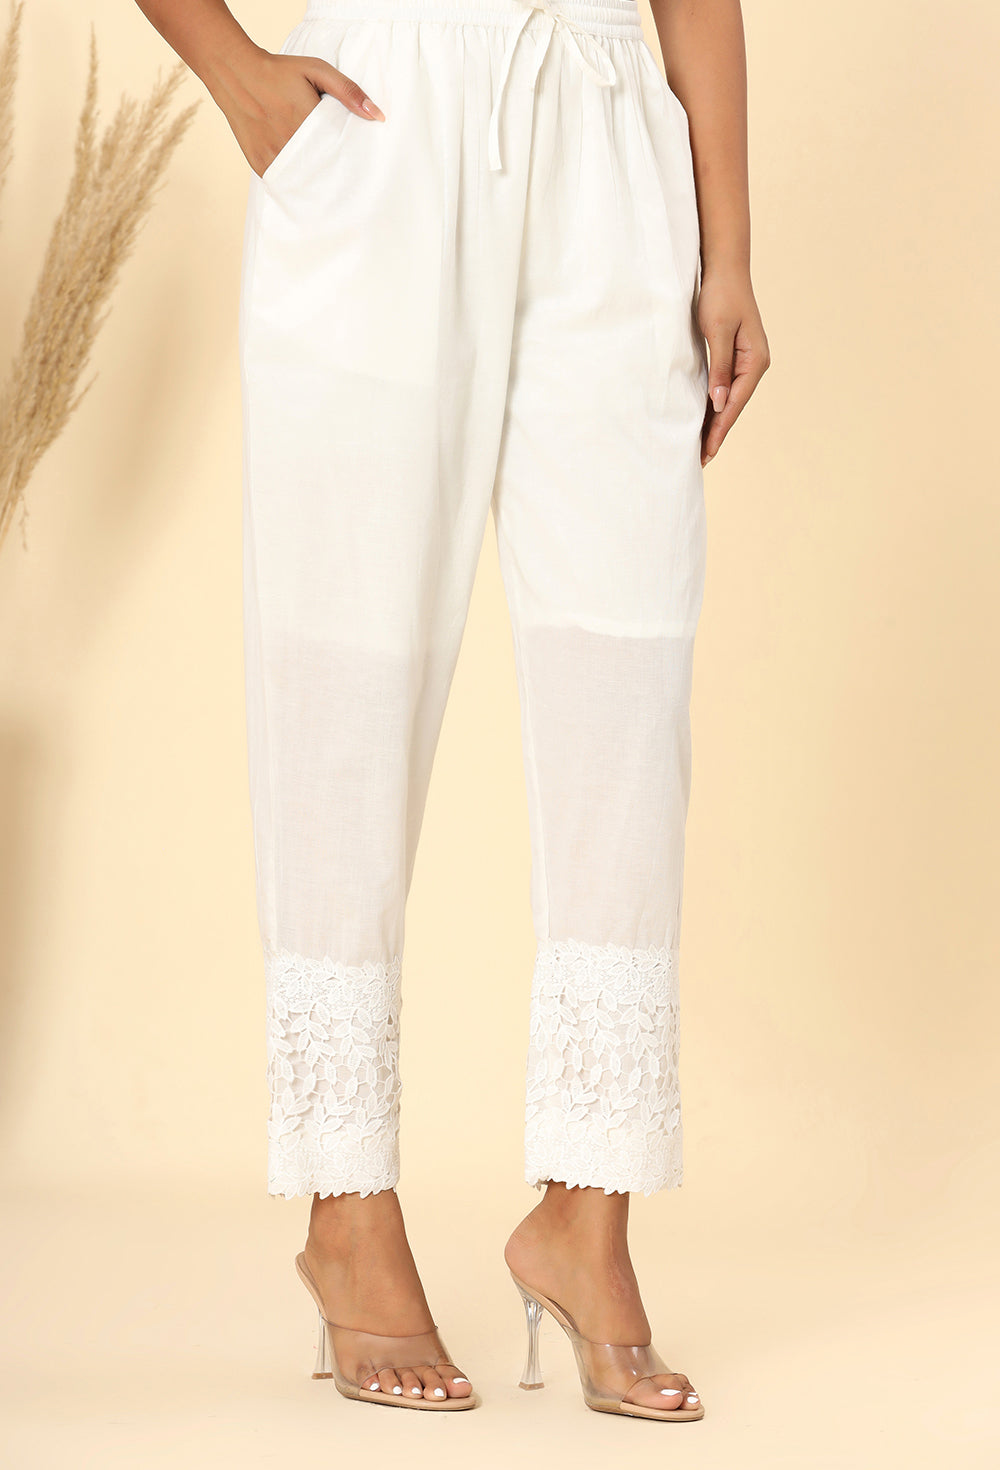 Pearl White Lace Pant